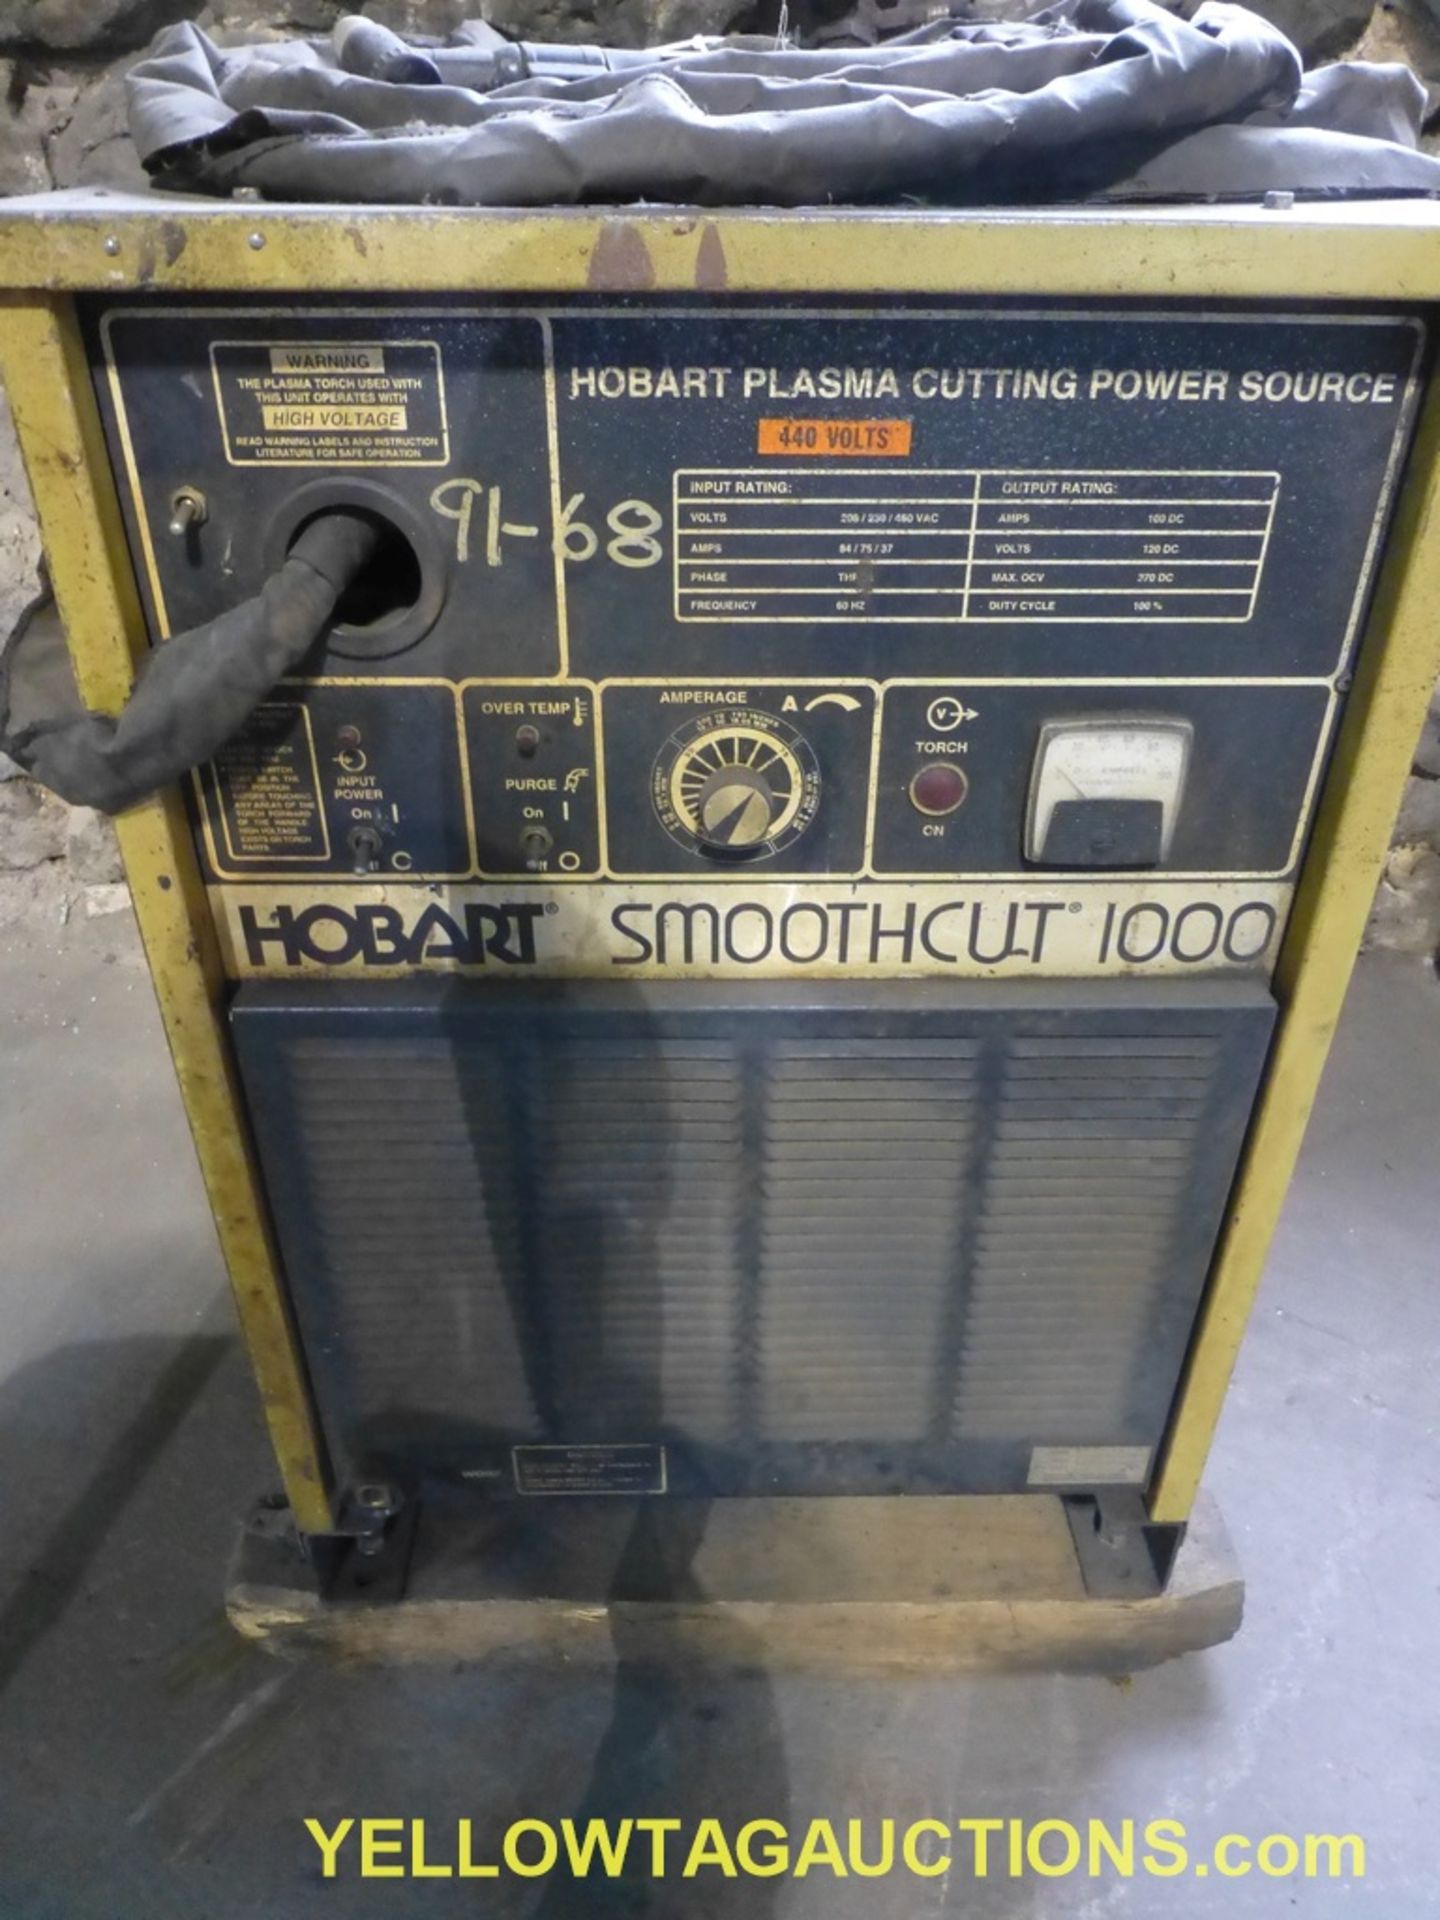 Hobart Plasma Cutting Power Source Smooth Cut 1000 | Stock No. 500101-1; 84-37A; 206-460 VAC - Image 3 of 10